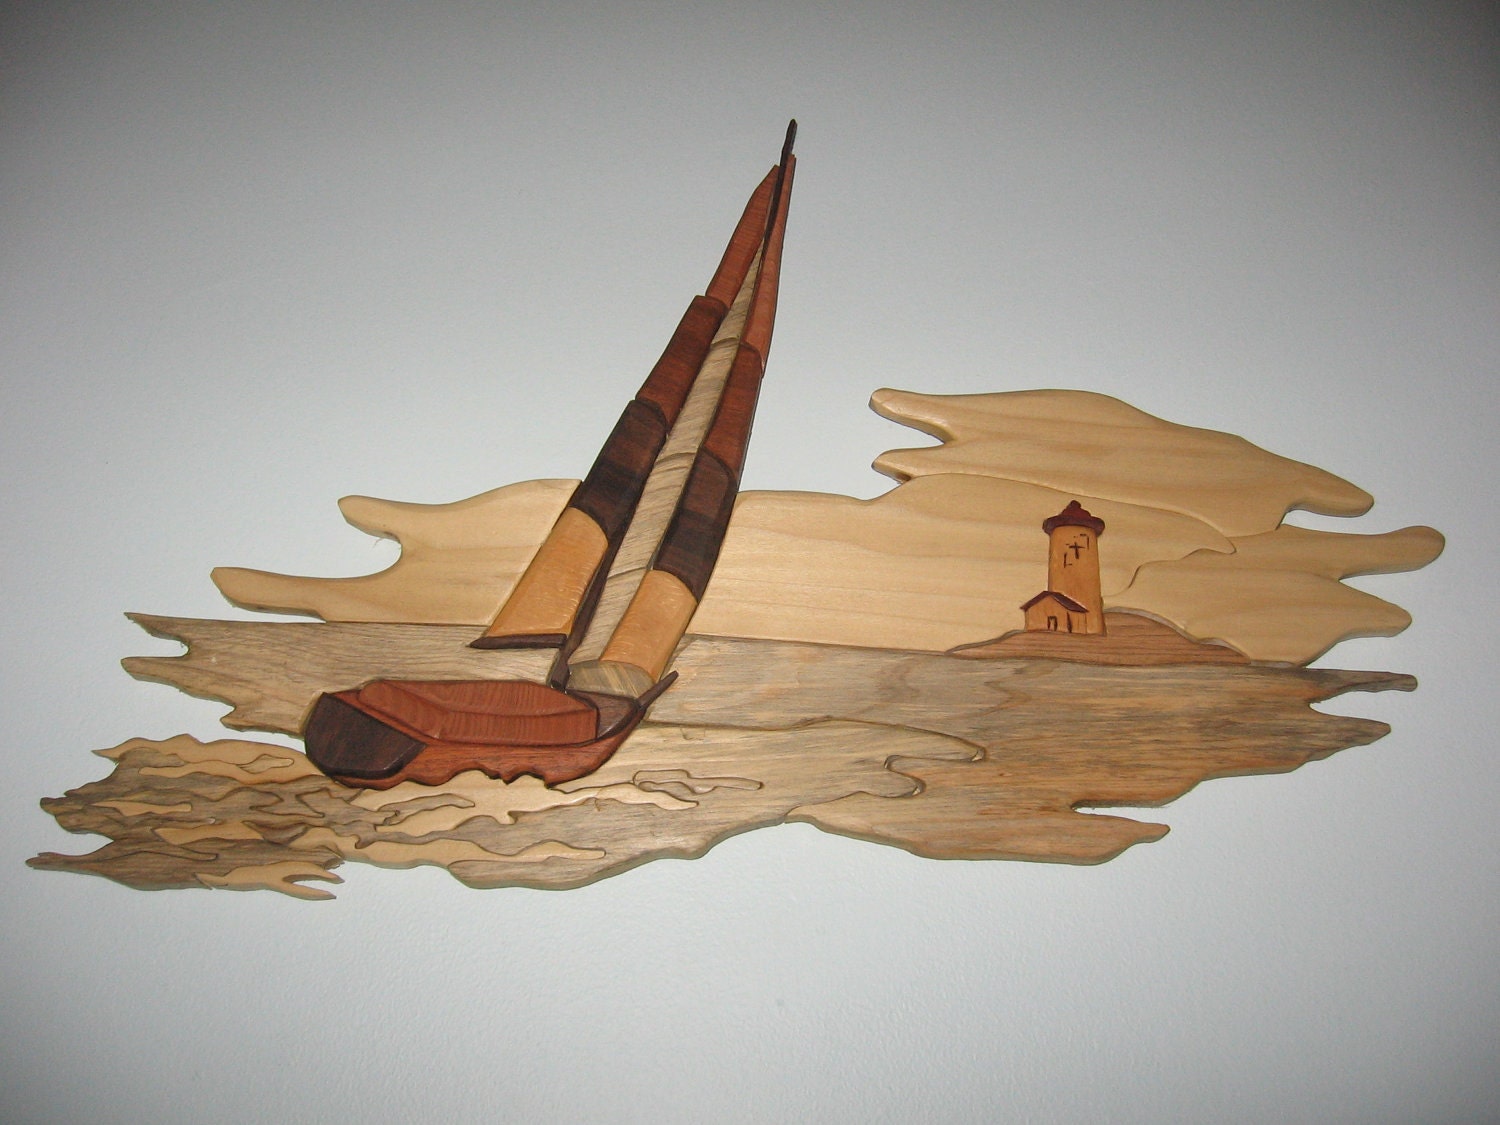 Intarsia Wood Art For Sale By Artist - Image Mag